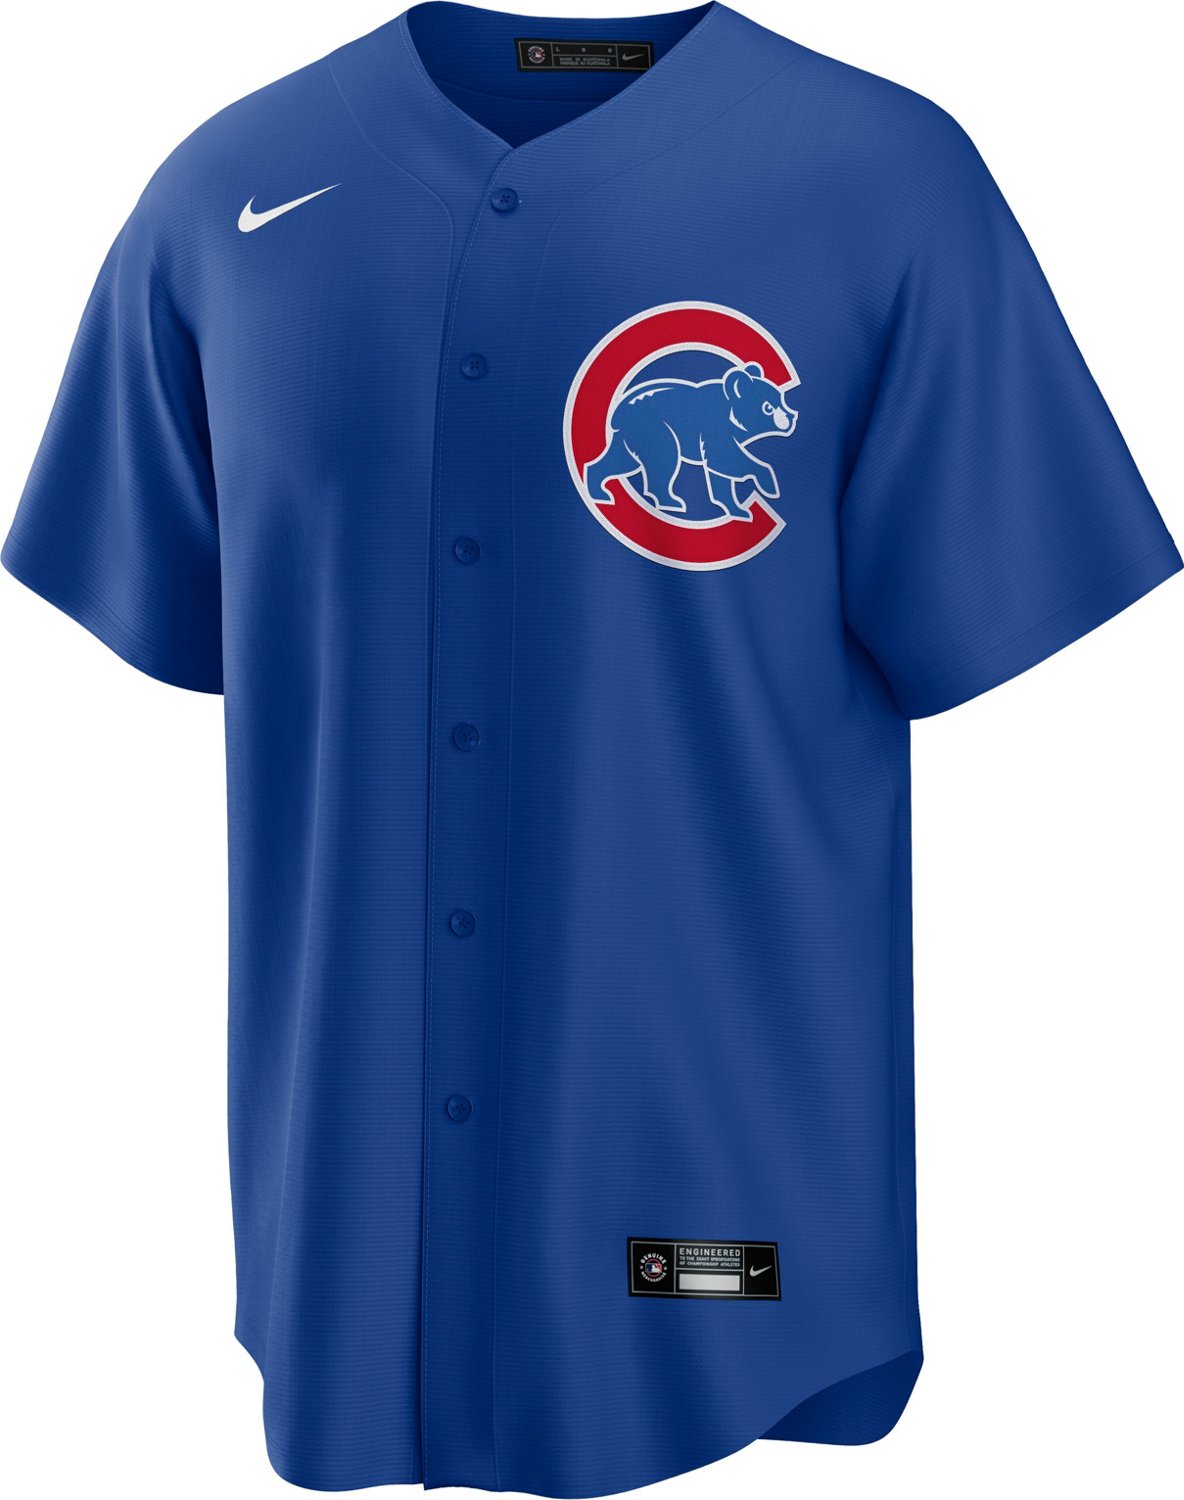 Chicago Cubs, Chicago Cubs Hats, Cubs Apparel, Cubs shirts